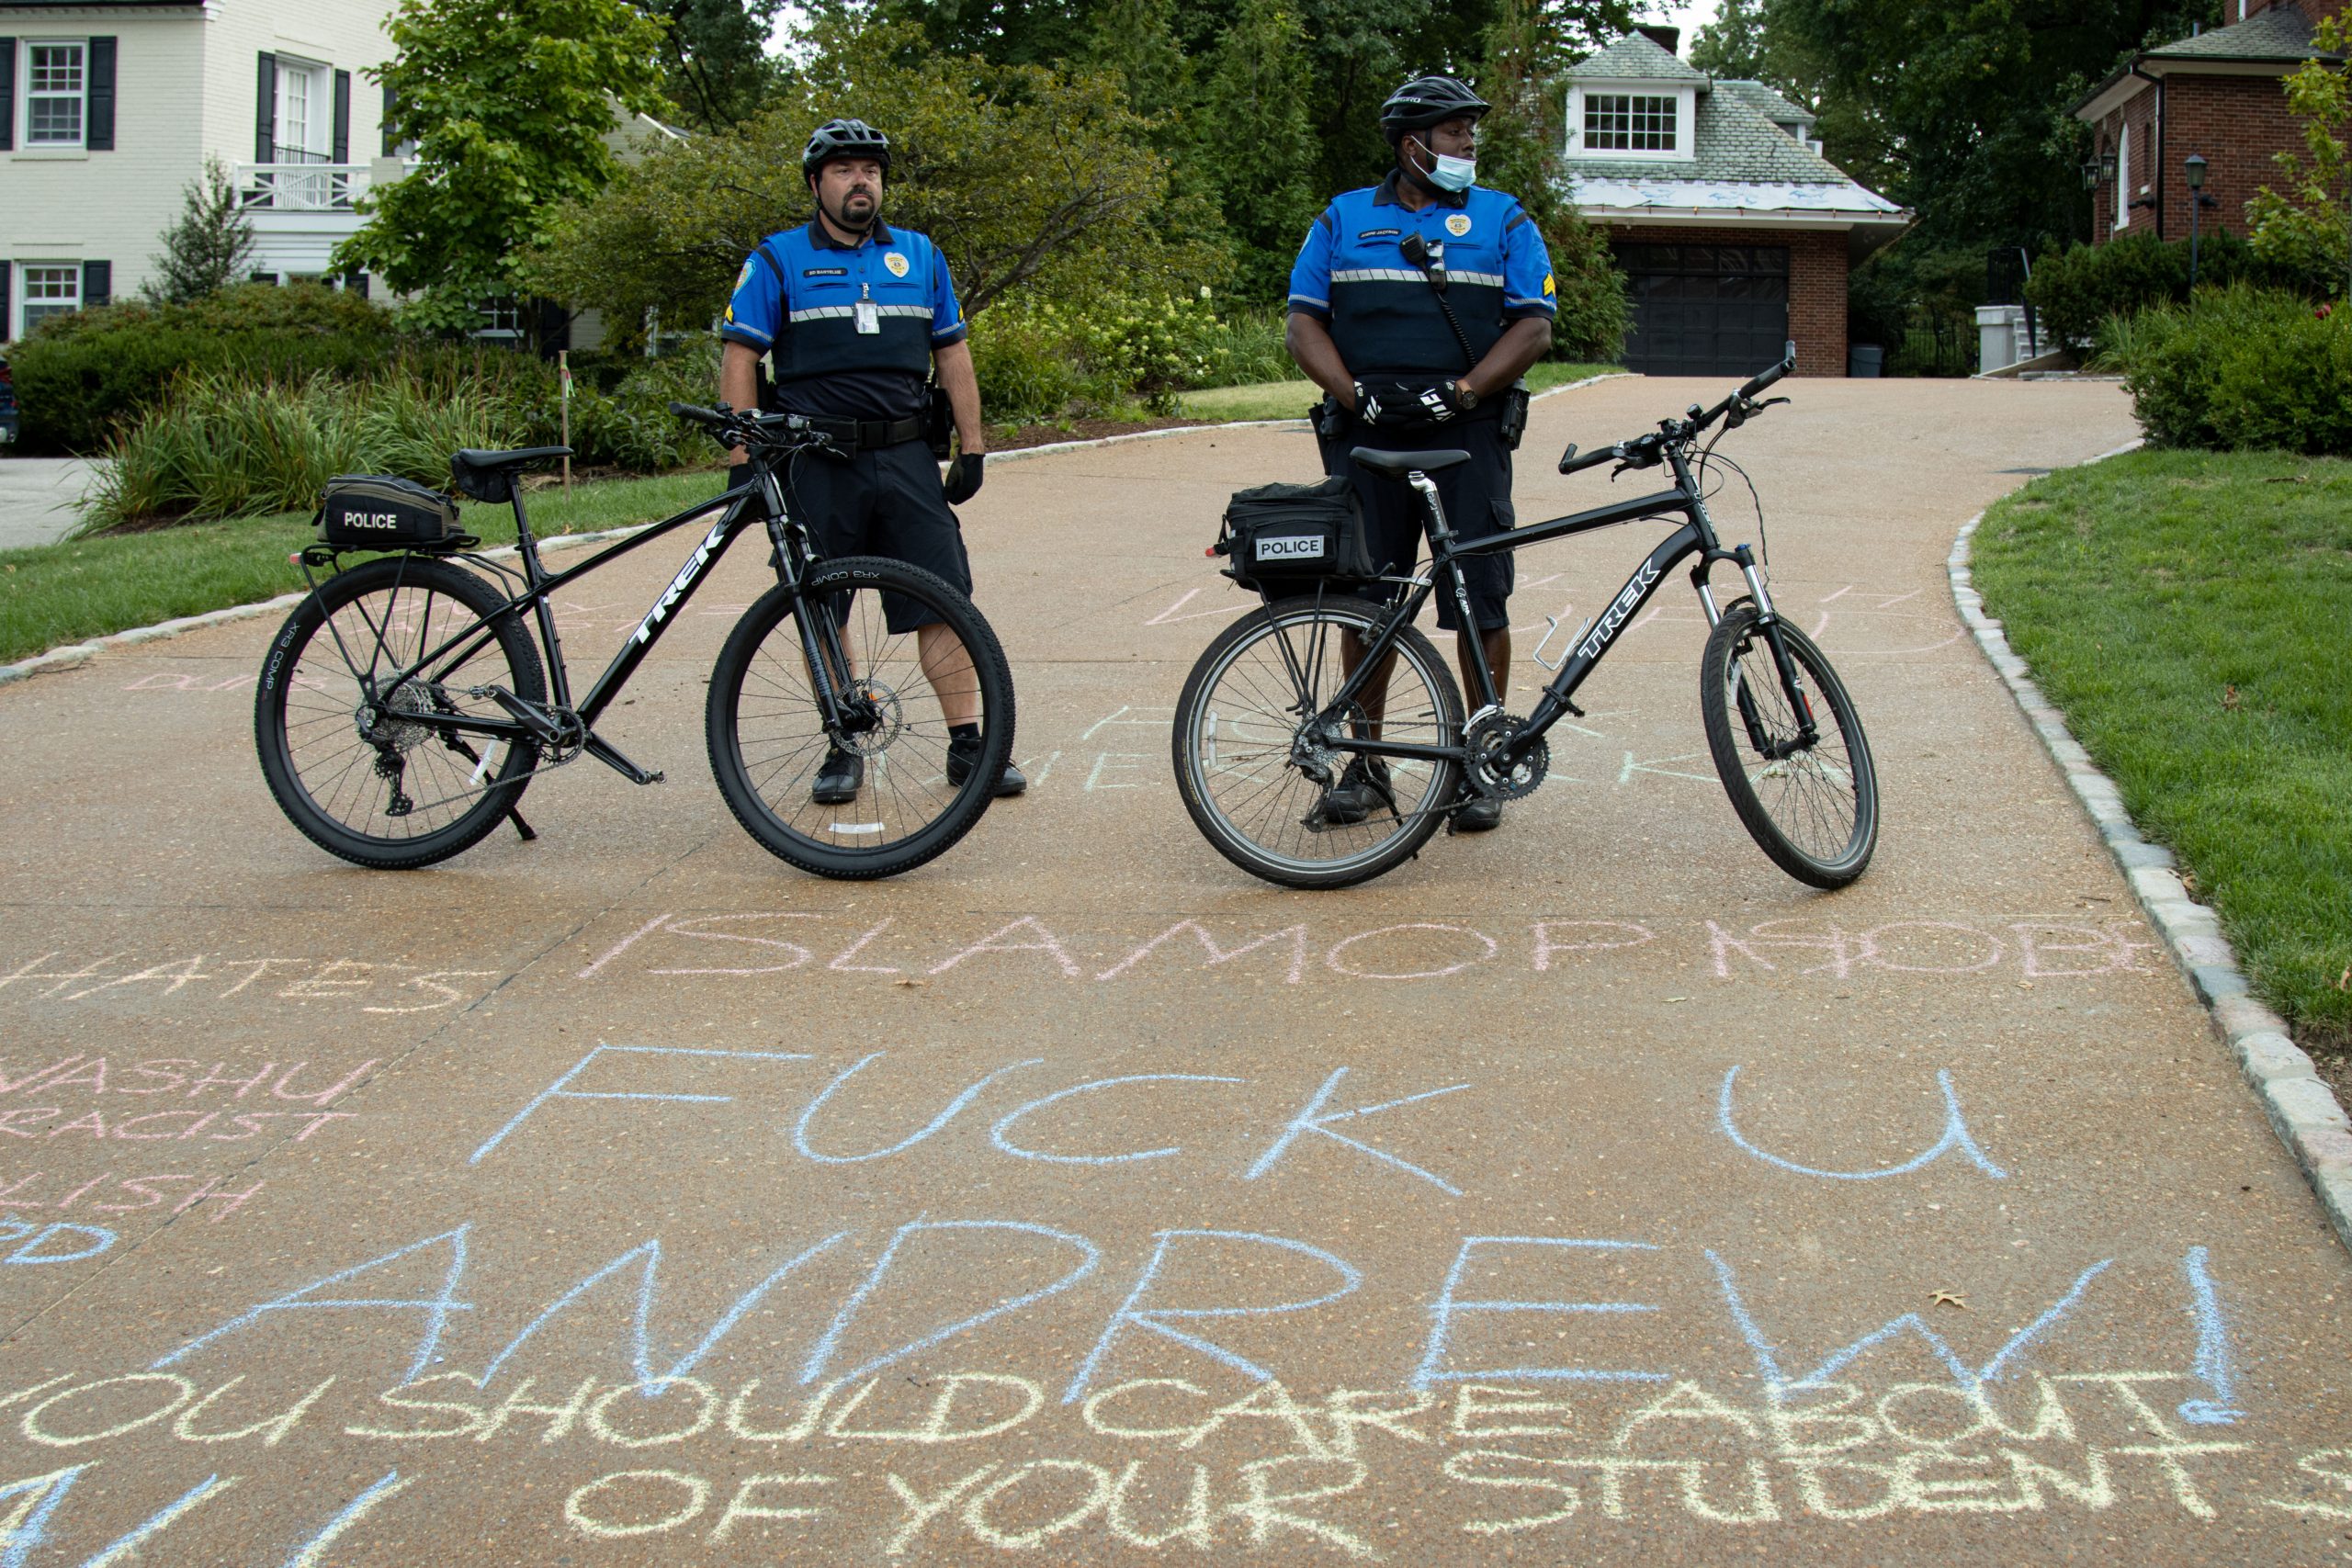 Two police officers in dark blue shirts and black shorts stand behind bicycles on a brick driveway. Written in chalk on the driveway in front of them are slogans such as "Fuck u Andrew!" "Islamophobe," and "You should care about ALL of your students." There are trees in the background.